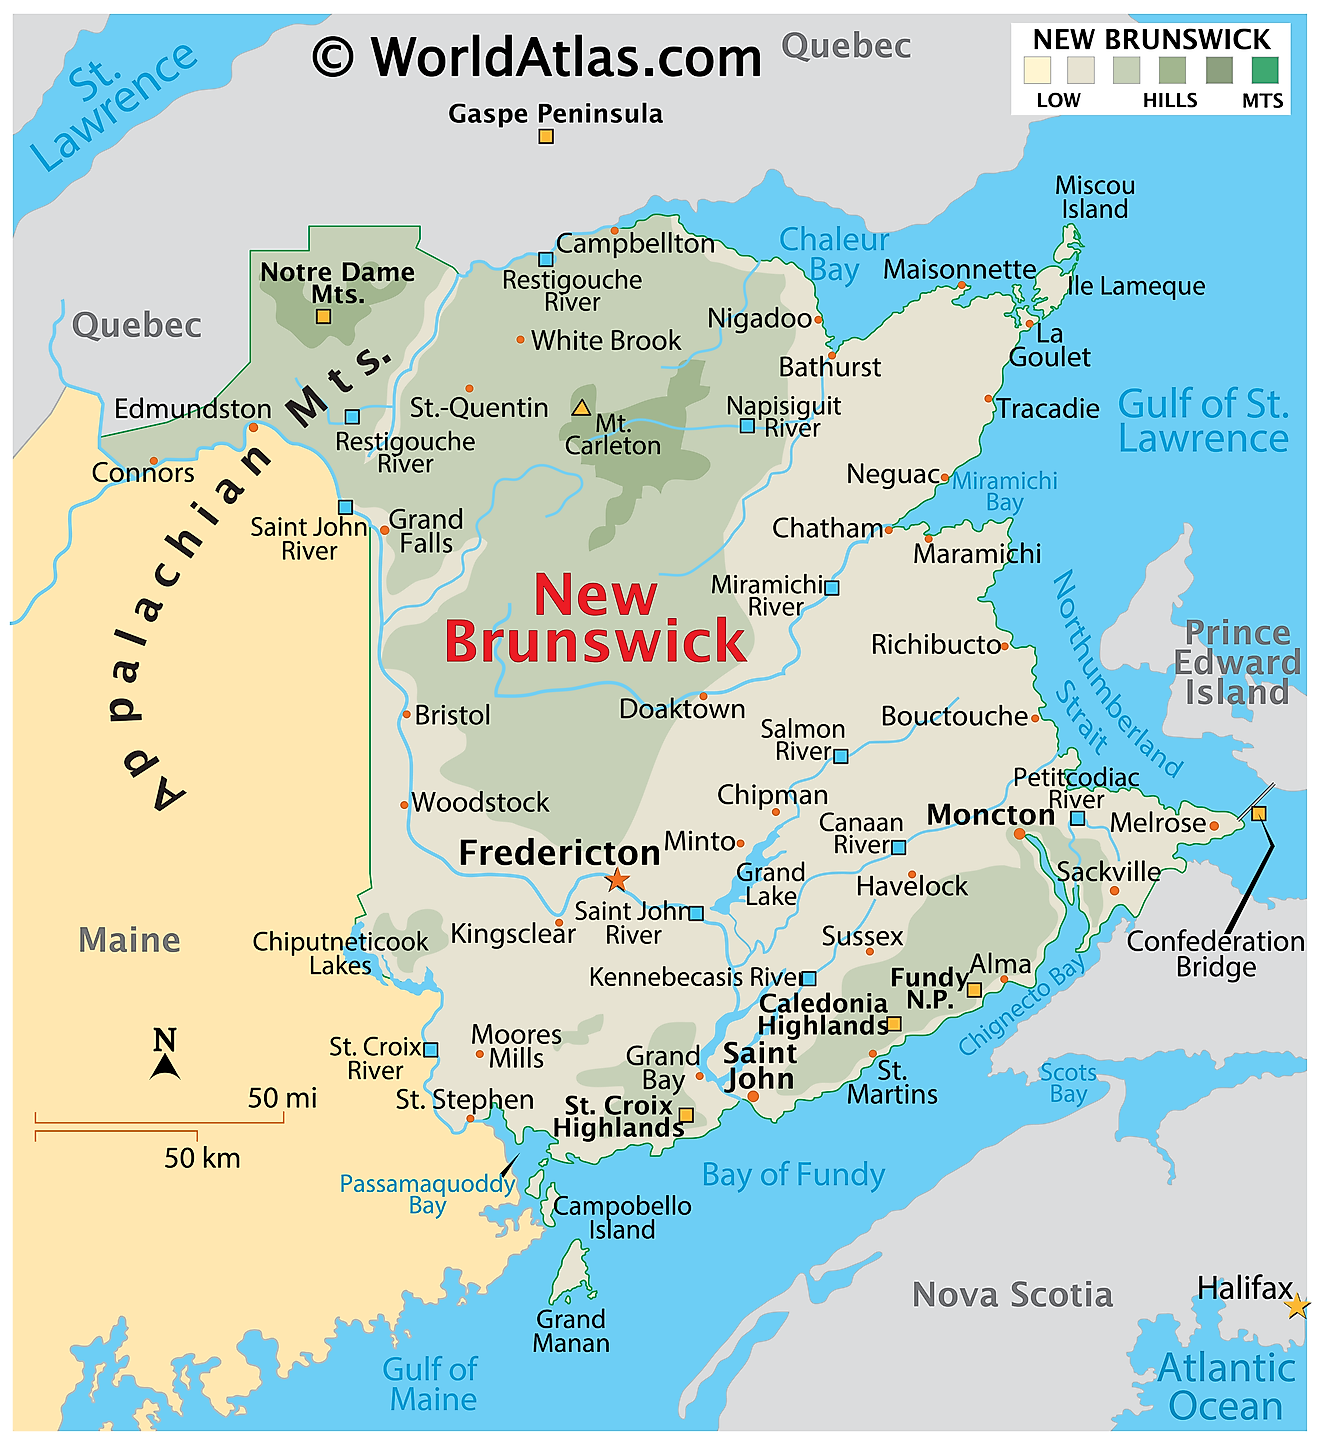 Albums 98+ Wallpaper Pictures Of New Brunswick Canada Sharp